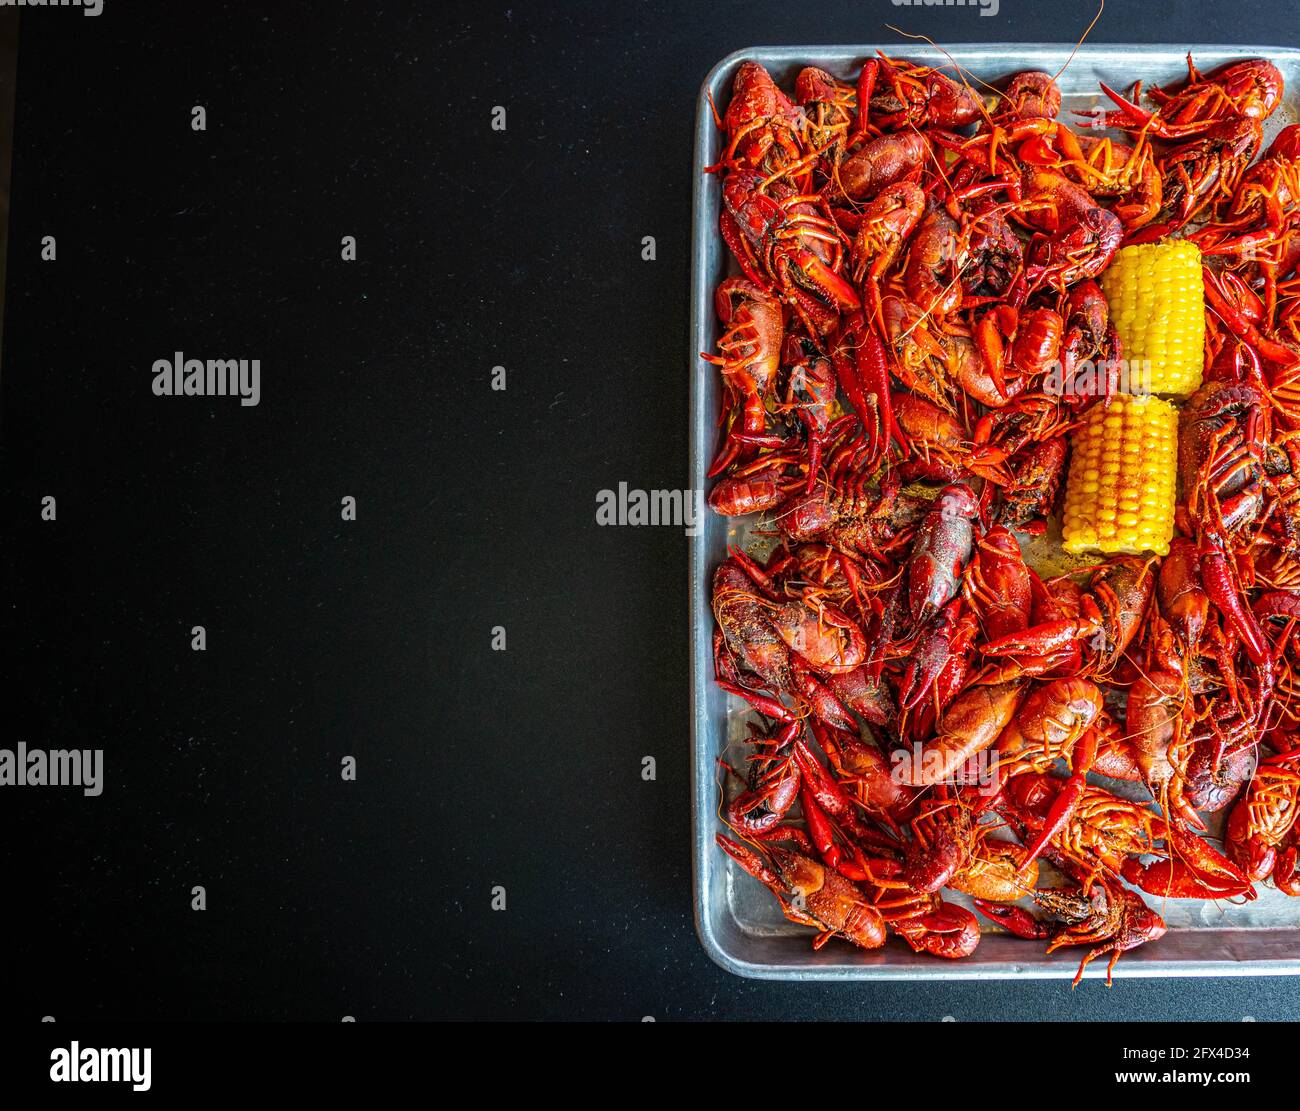 Boiled Crawfish and Yellow Corn on the cob Stock Photo